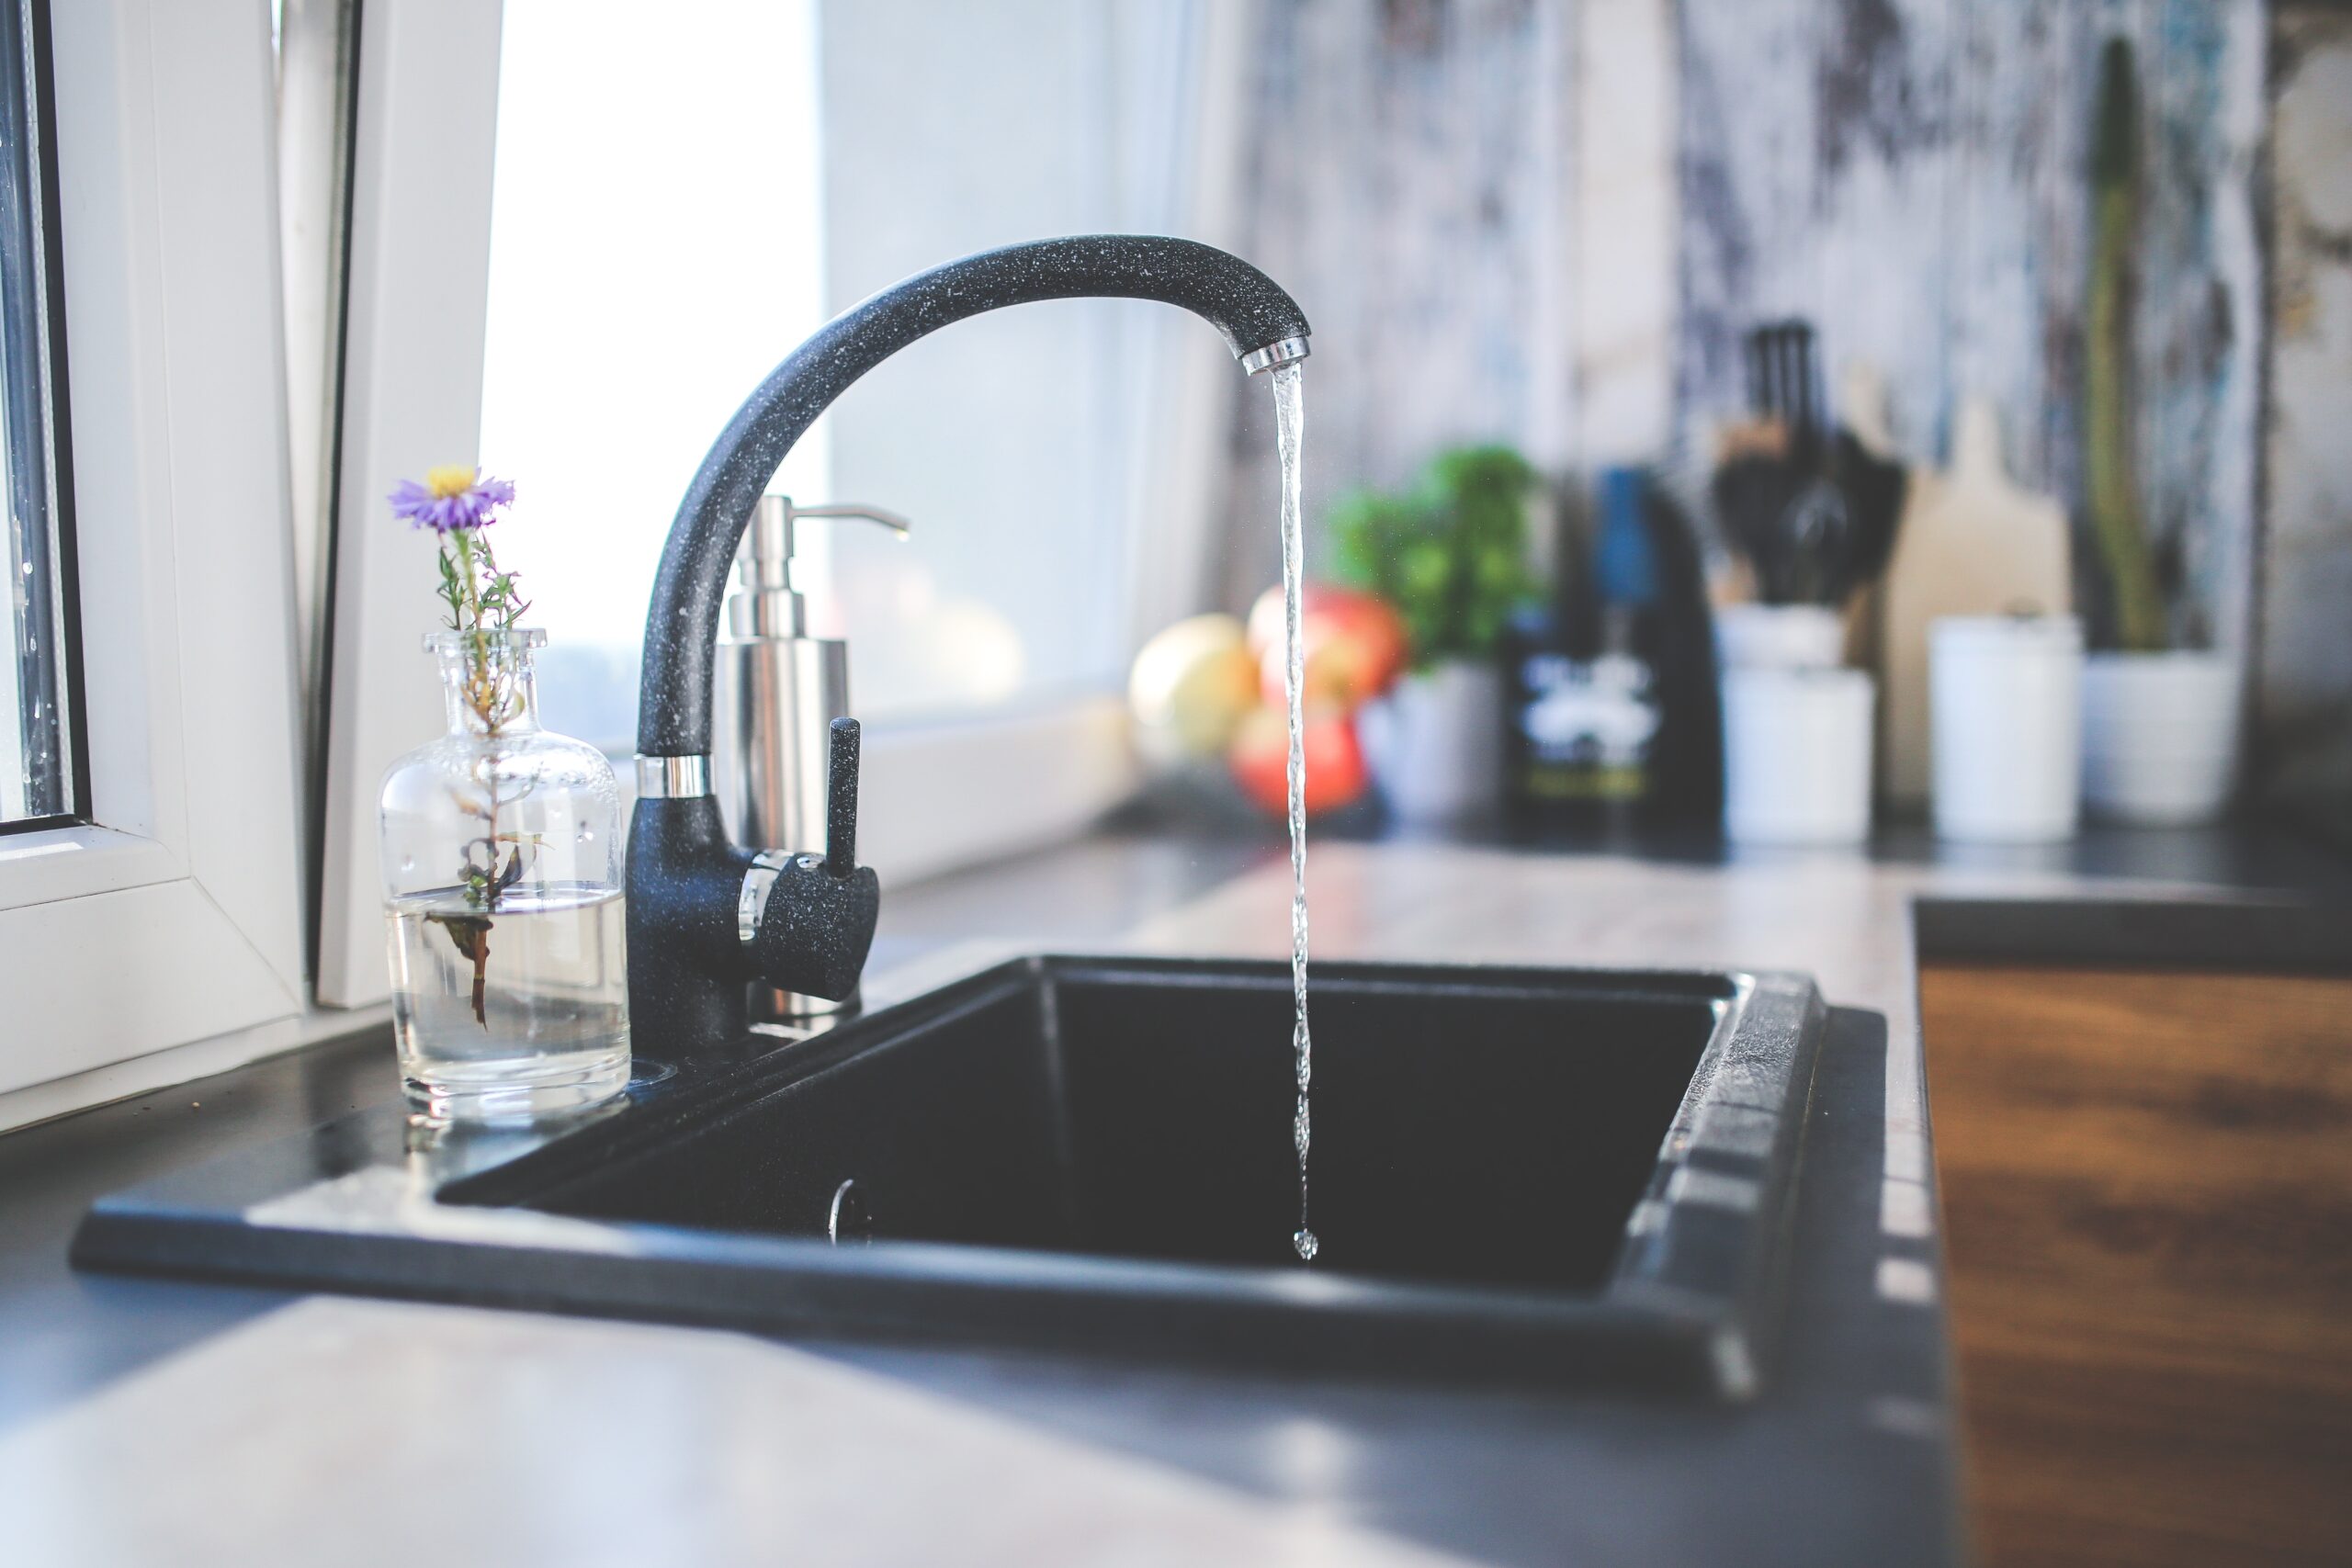 Efficient Plumbing Solutions: Streamlining Your Business for Success